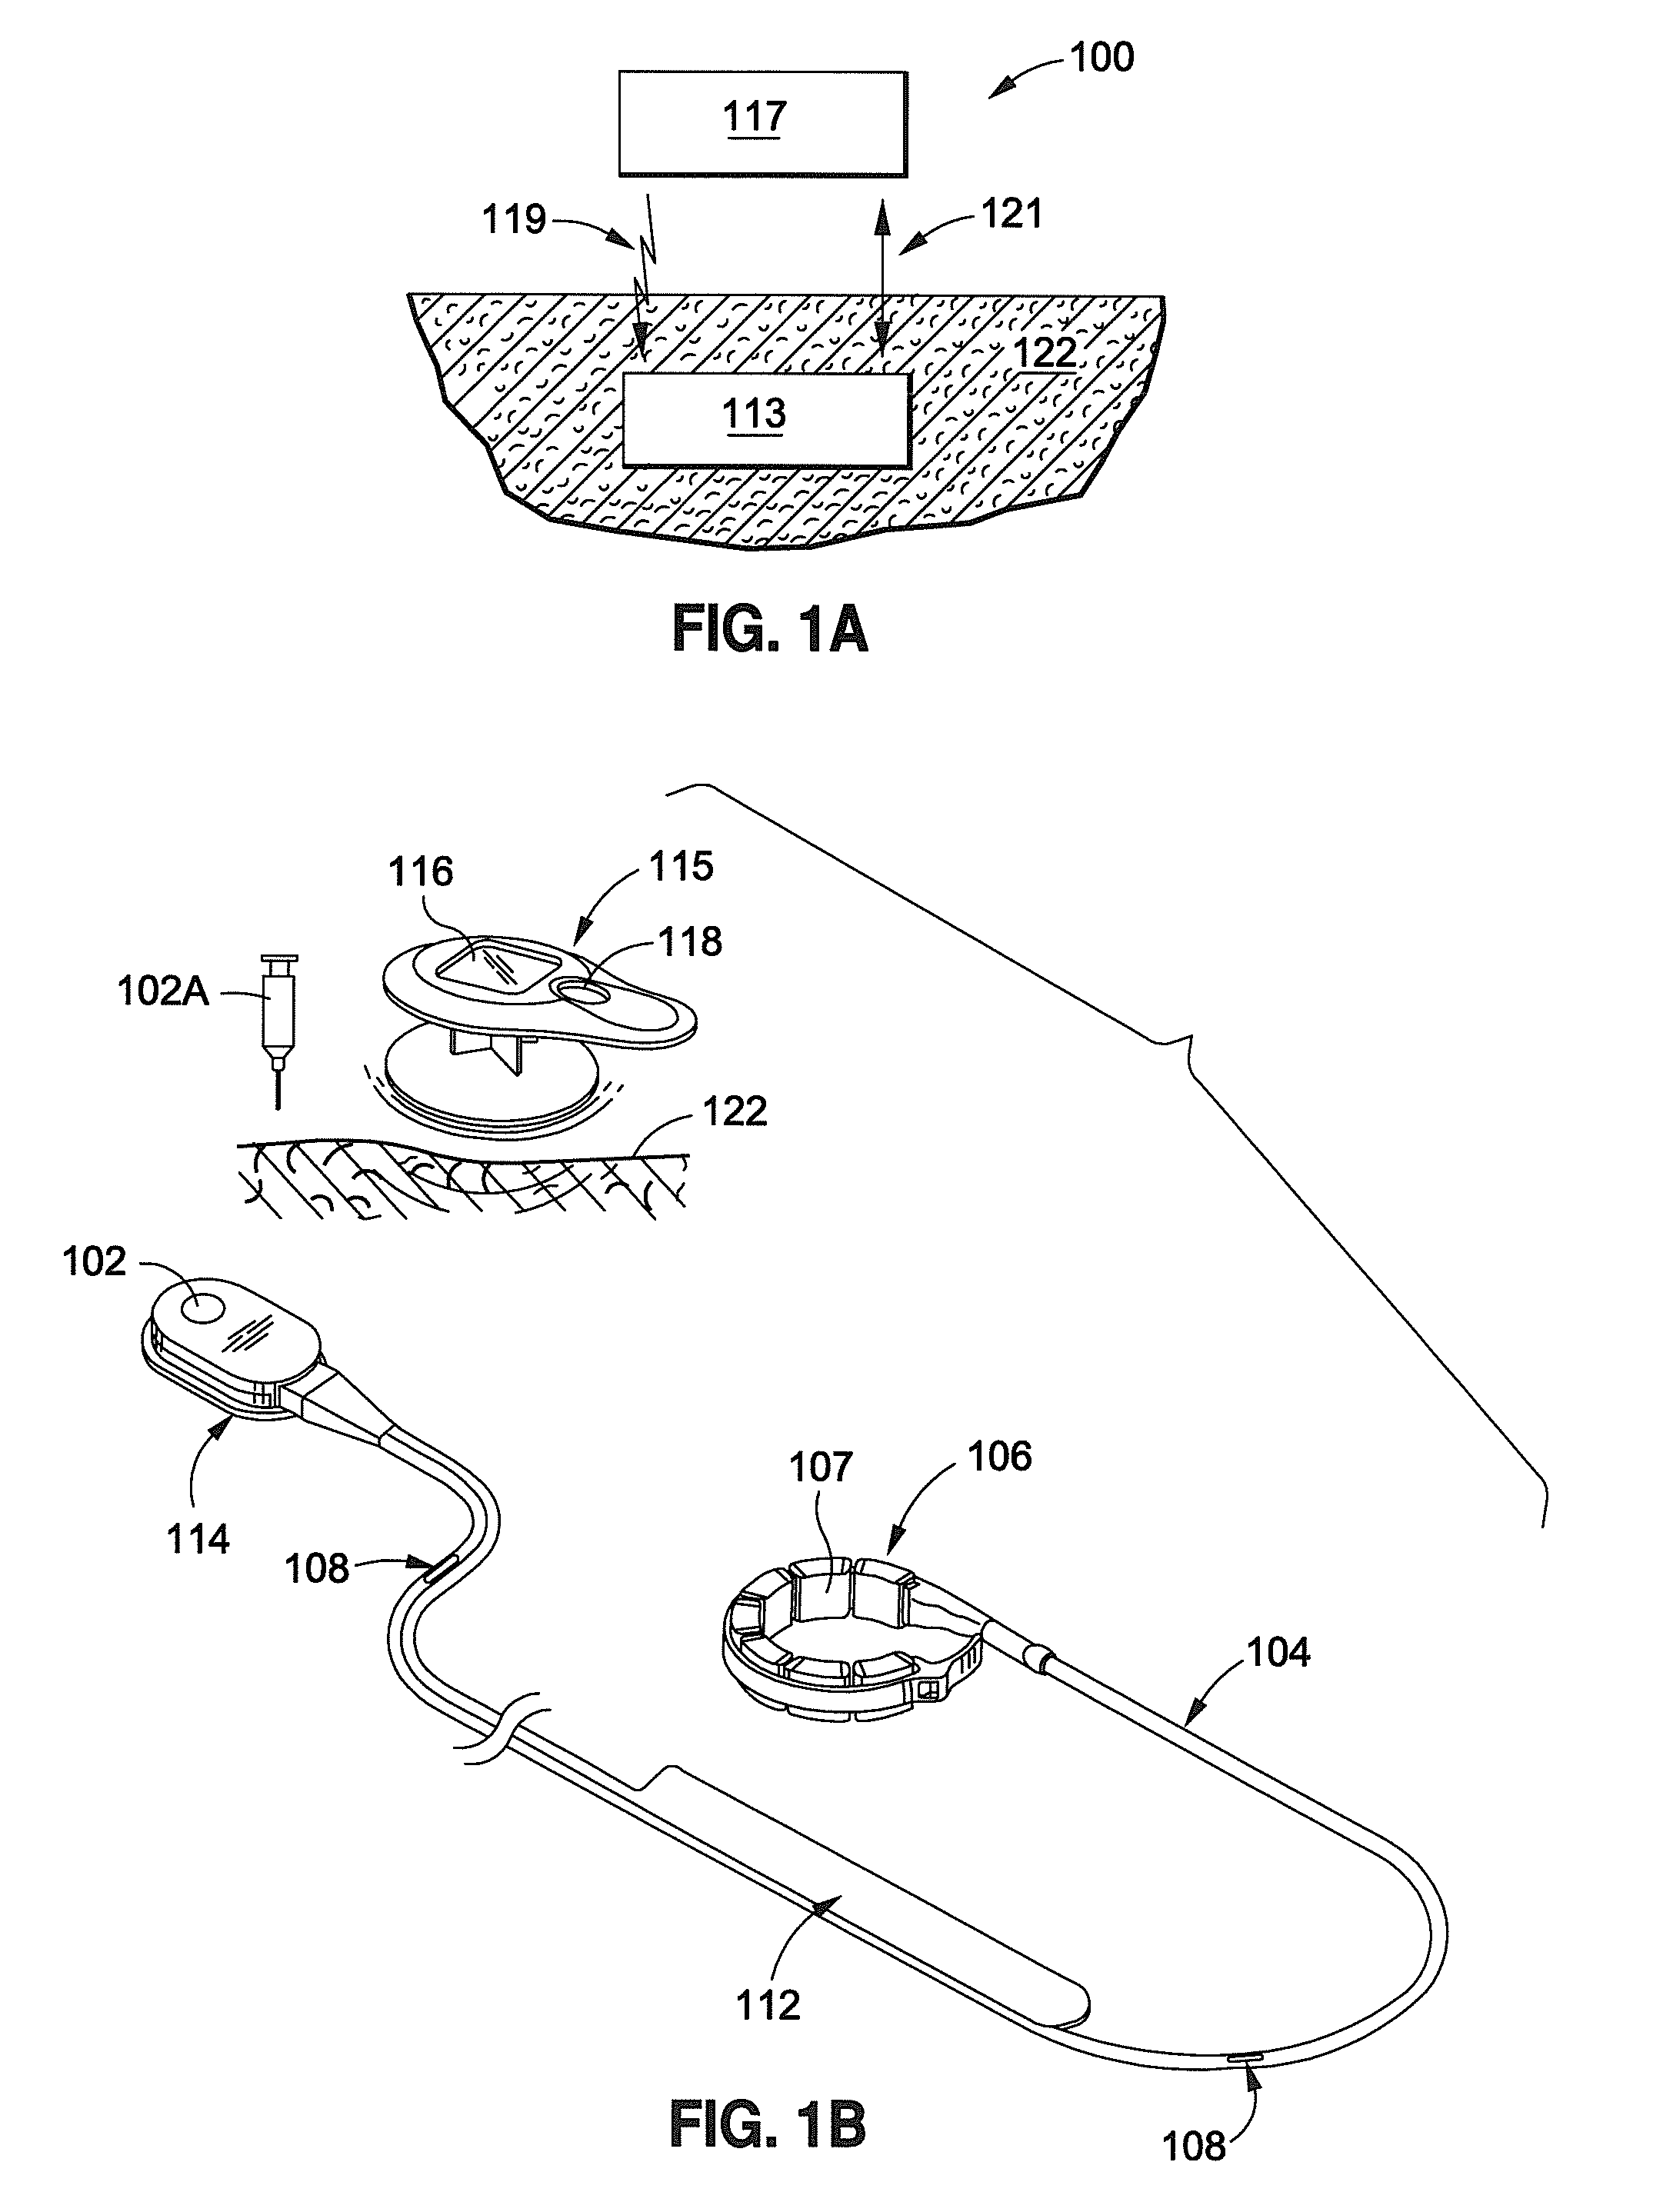 Inductively powered remotely adjustable gastric banding system